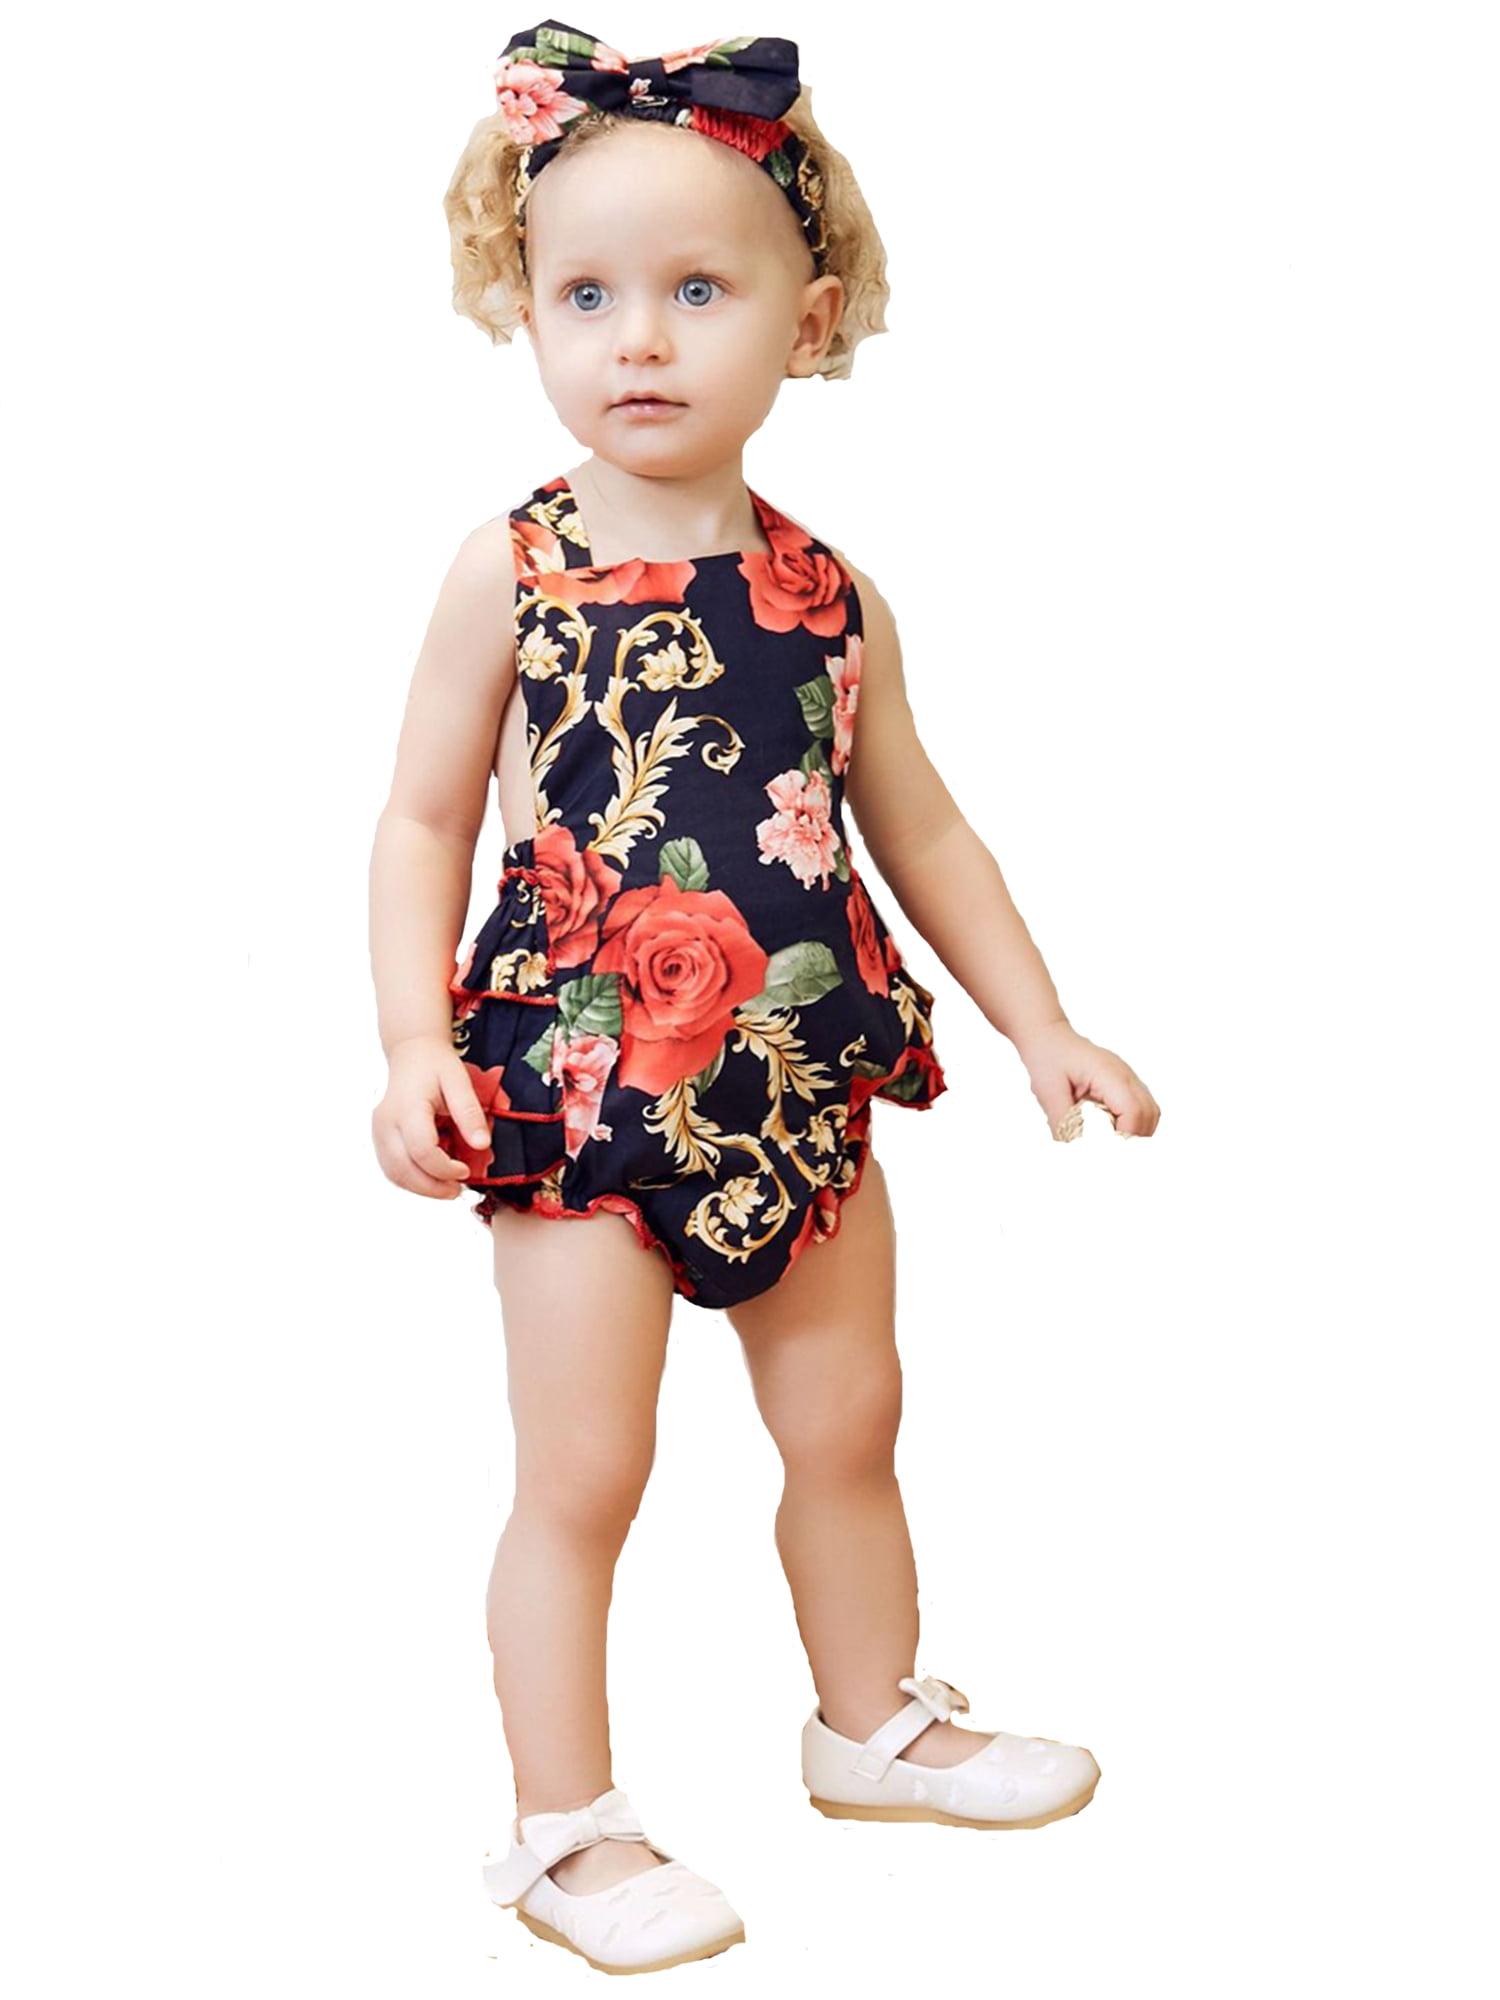 BFUSTYLE Newborn Baby Girl Floral Bodysuit Toddler Flutter Sleeve Romper Jumpsuit Outfit+Headband